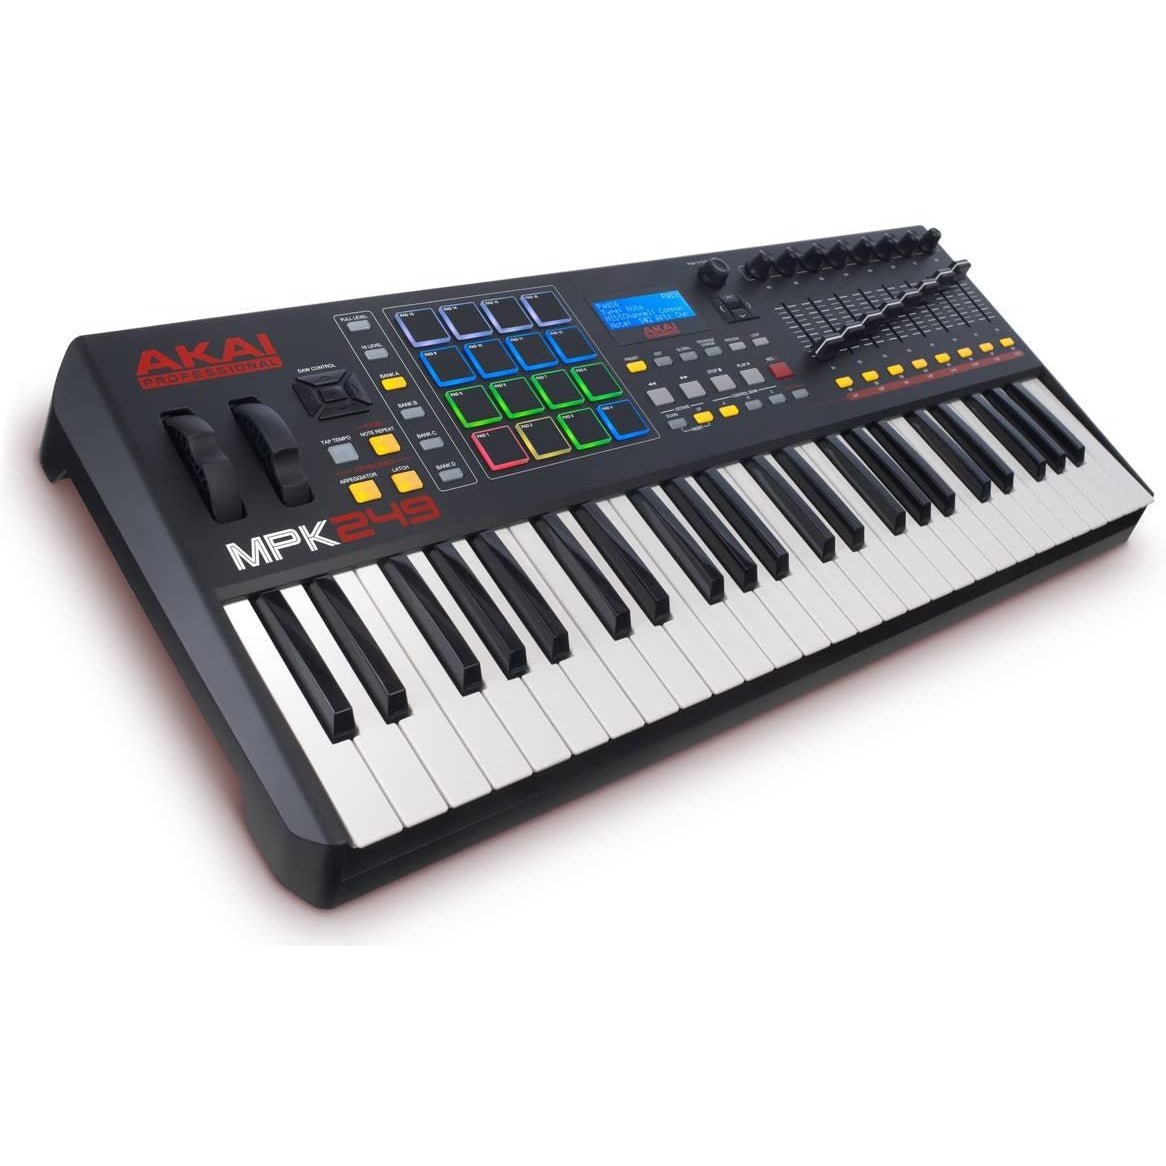 This is an Akai Professional MPK249 49-key Keyboard Controller.